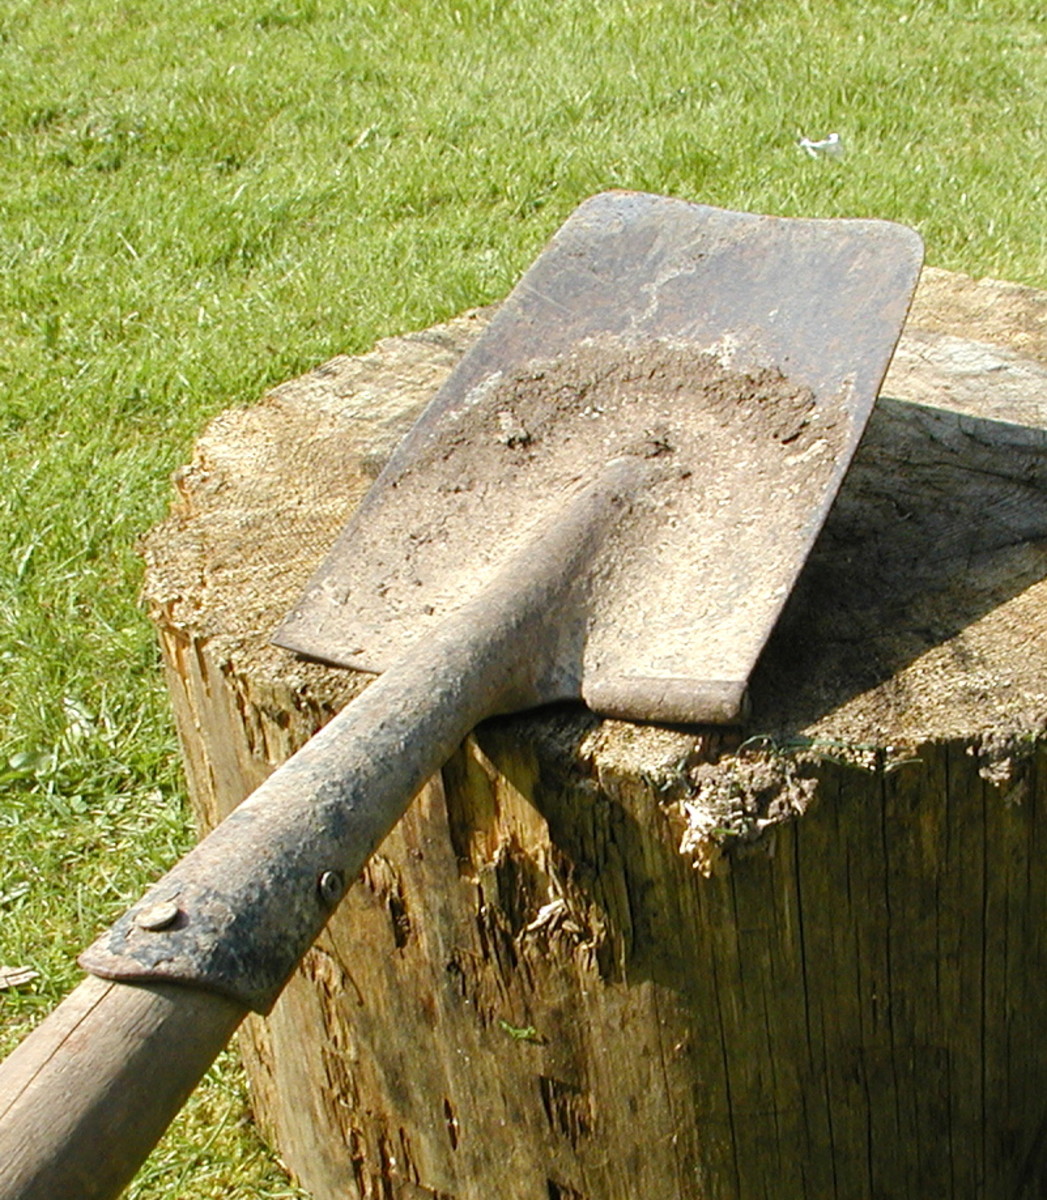 How to Sharpen a Spade, Hoe or Axe With an Angle Grinder